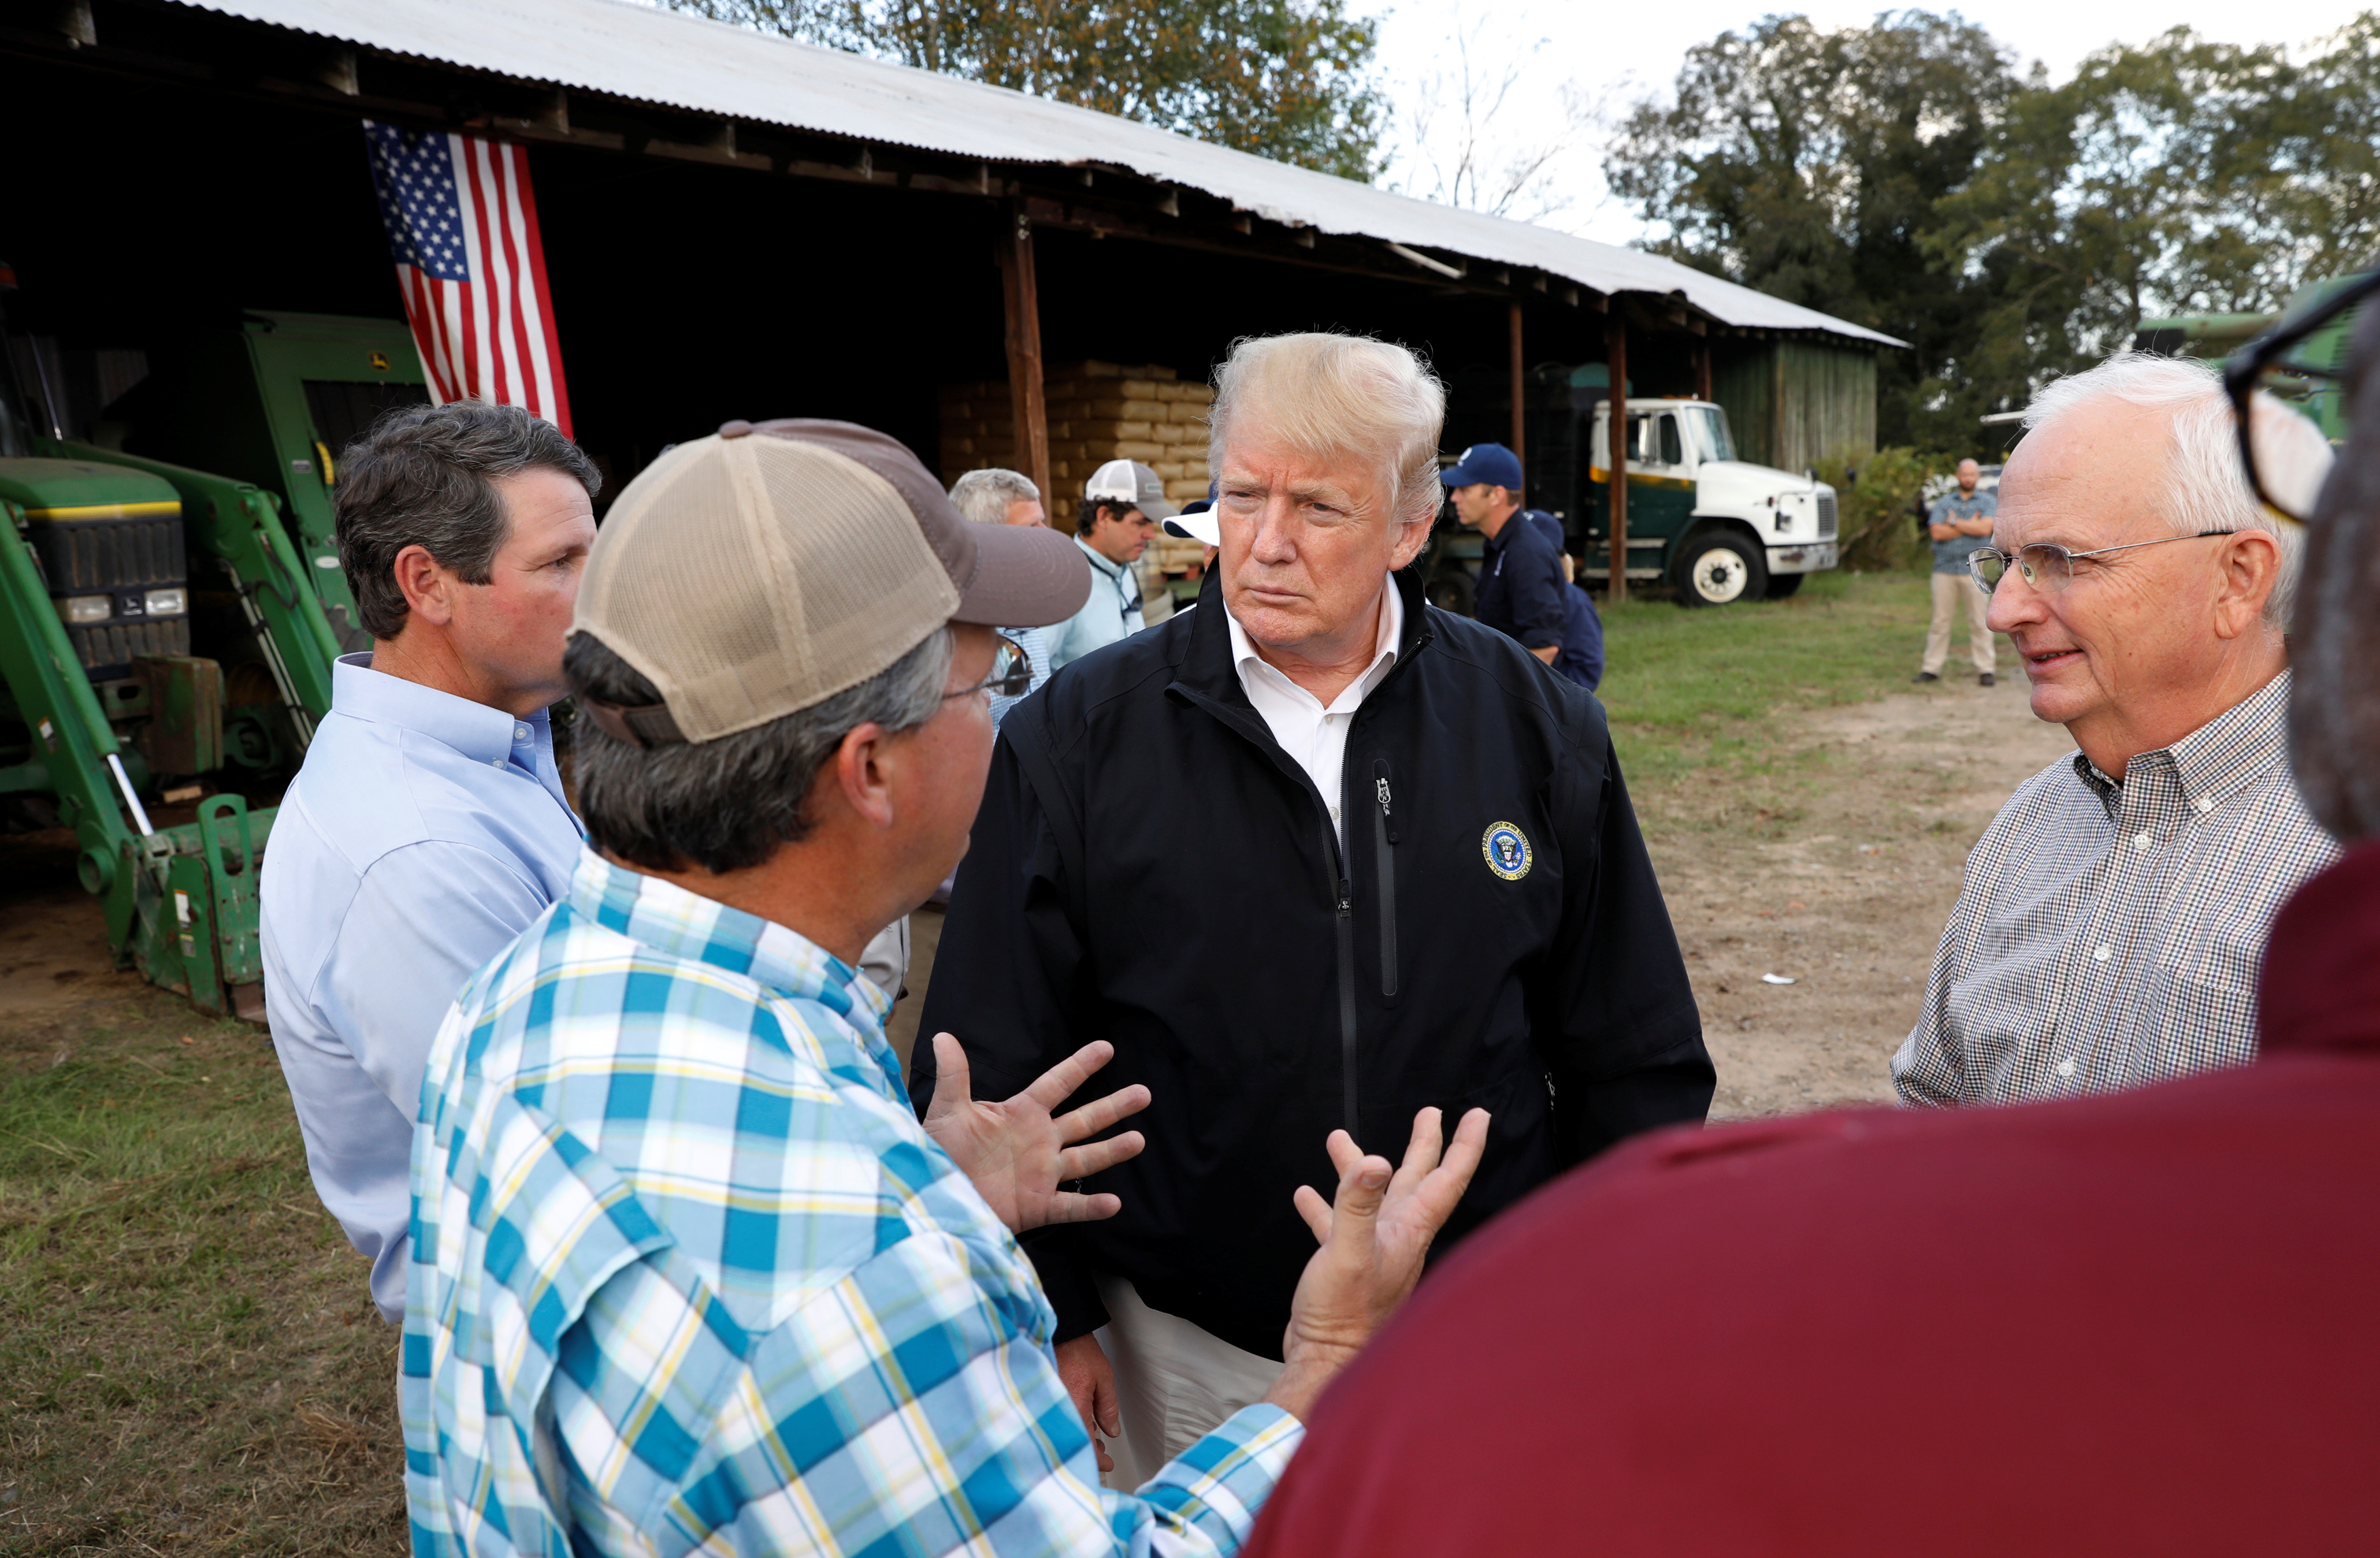 U.S. President Donald Trump meets with farmers affected by Hurricane Michael in Macon, Georgia, U.S., October 15, 2018. REUTERS/Kevin Lamarque